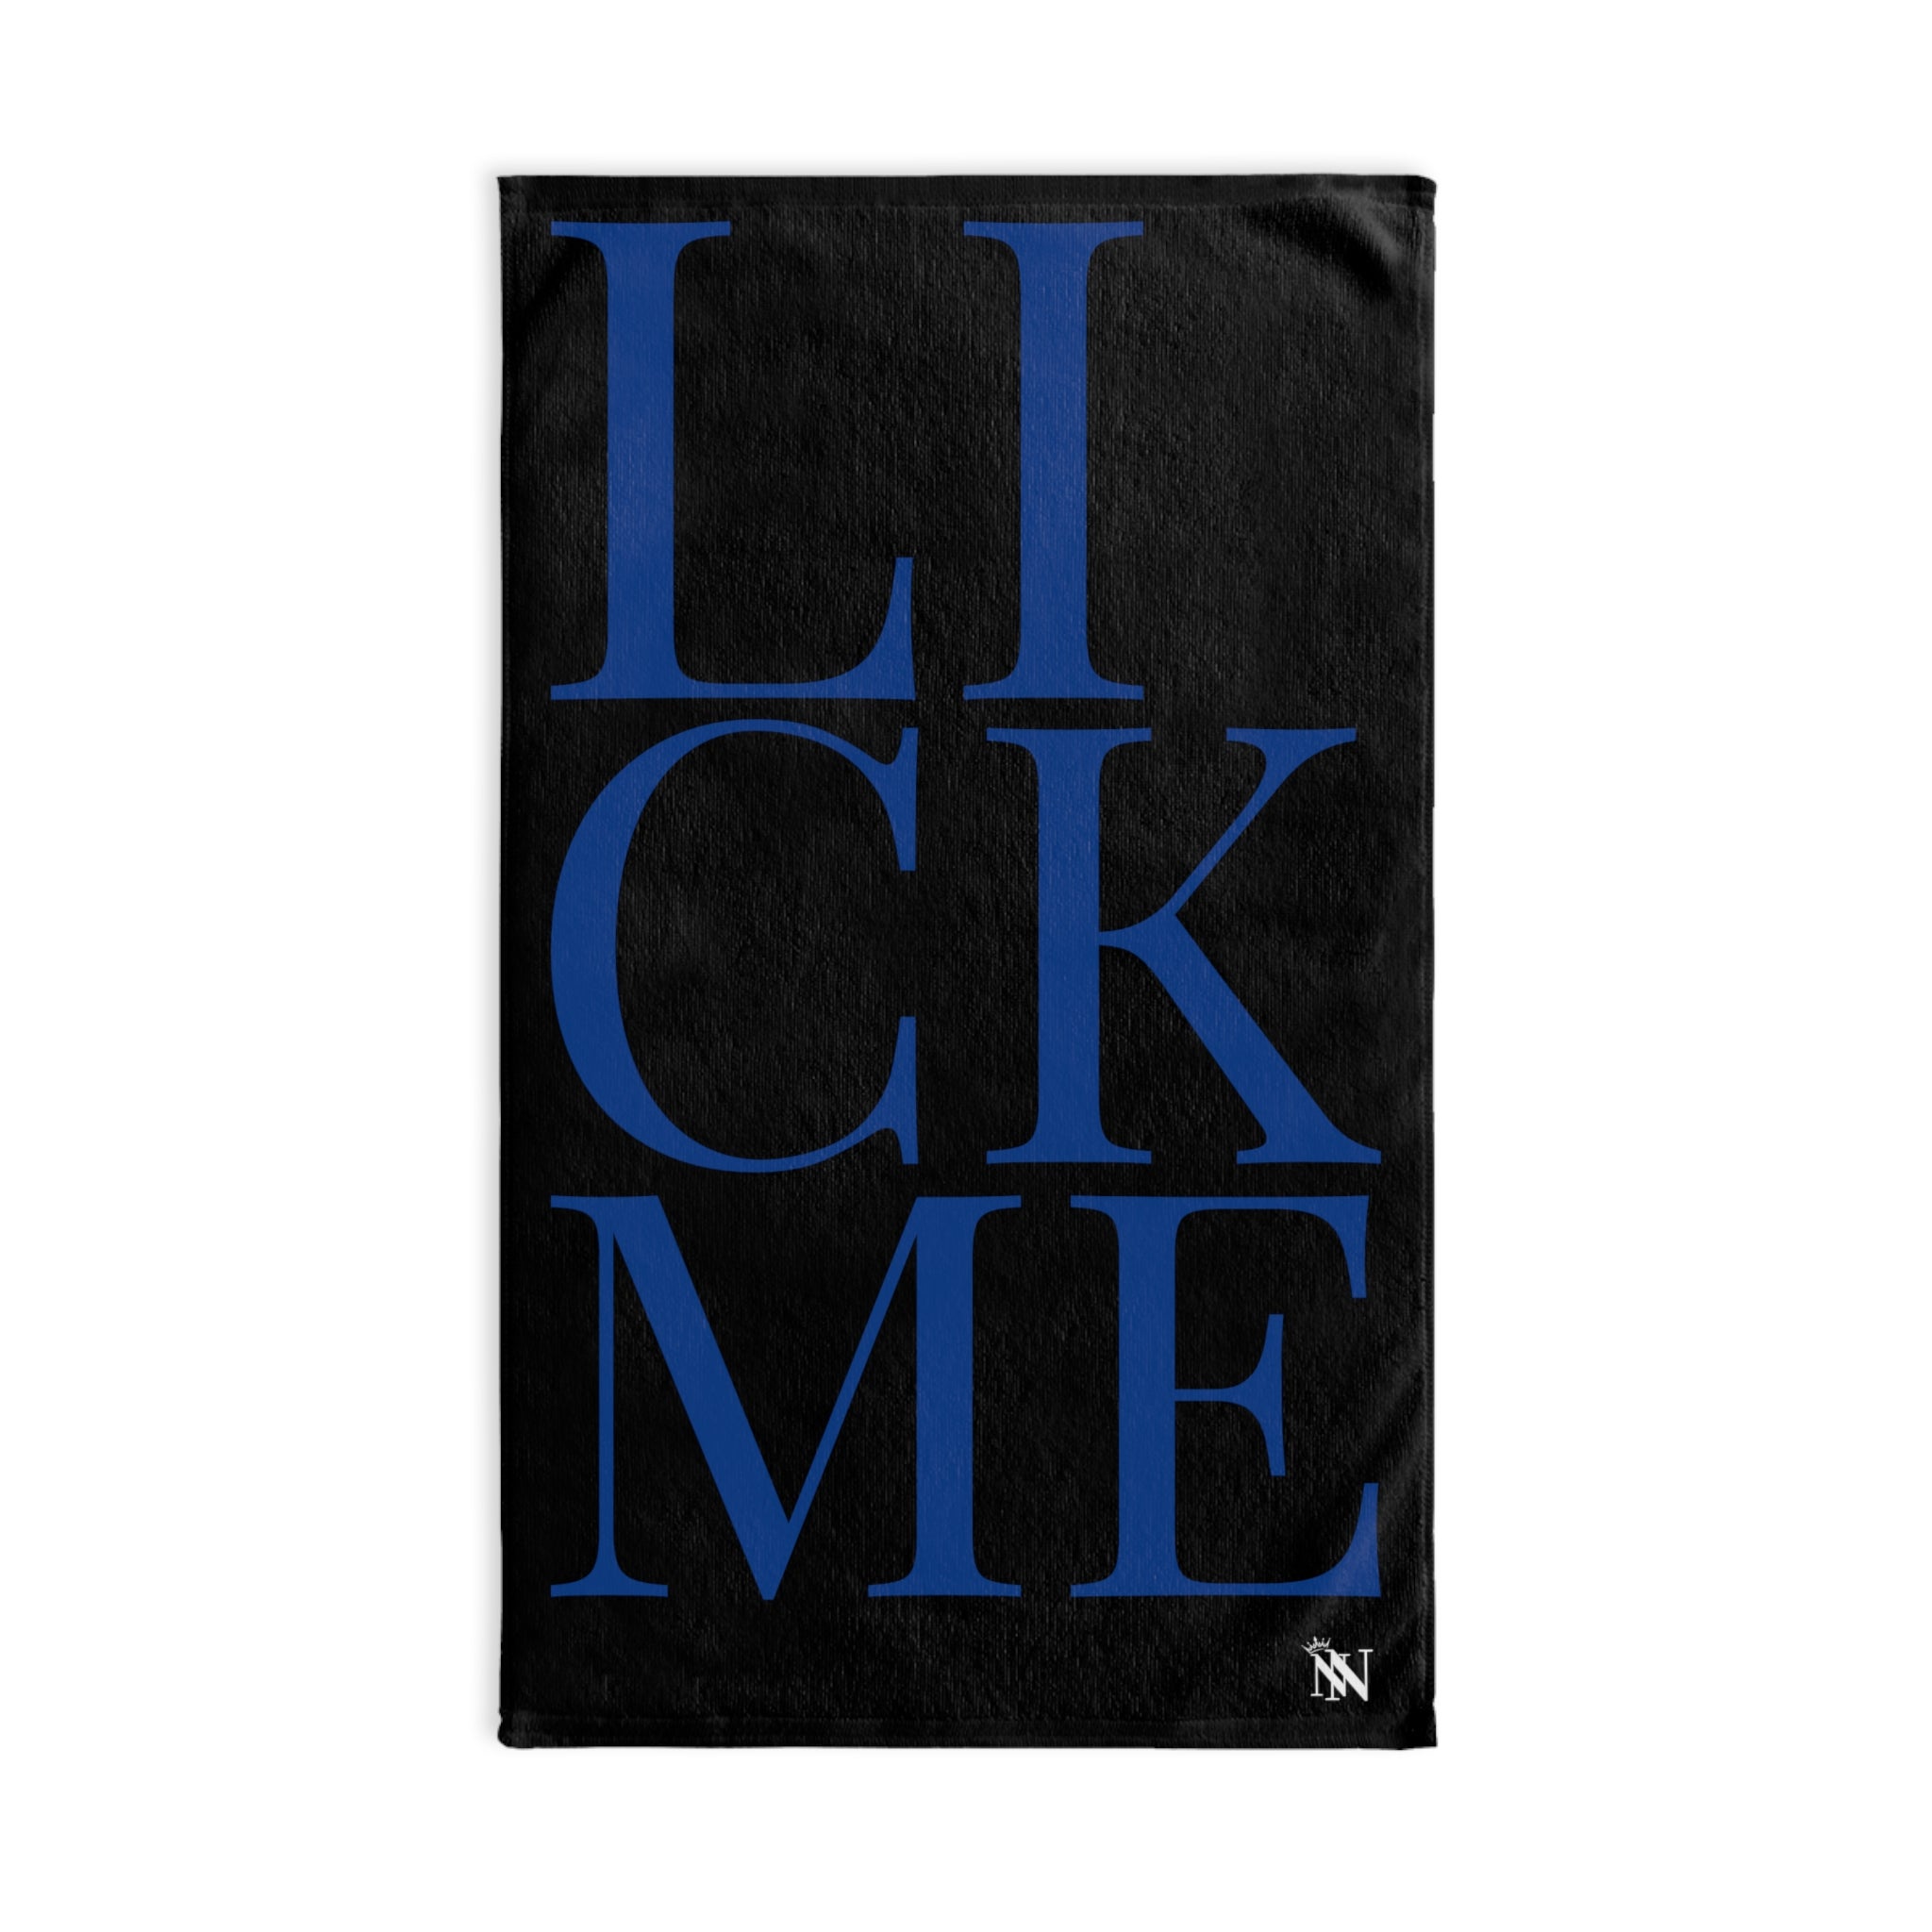 Lick Me Blue Black | Sexy Gifts for Boyfriend, Funny Towel Romantic Gift for Wedding Couple Fiance First Year 2nd Anniversary Valentines, Party Gag Gifts, Joke Humor Cloth for Husband Men BF NECTAR NAPKINS